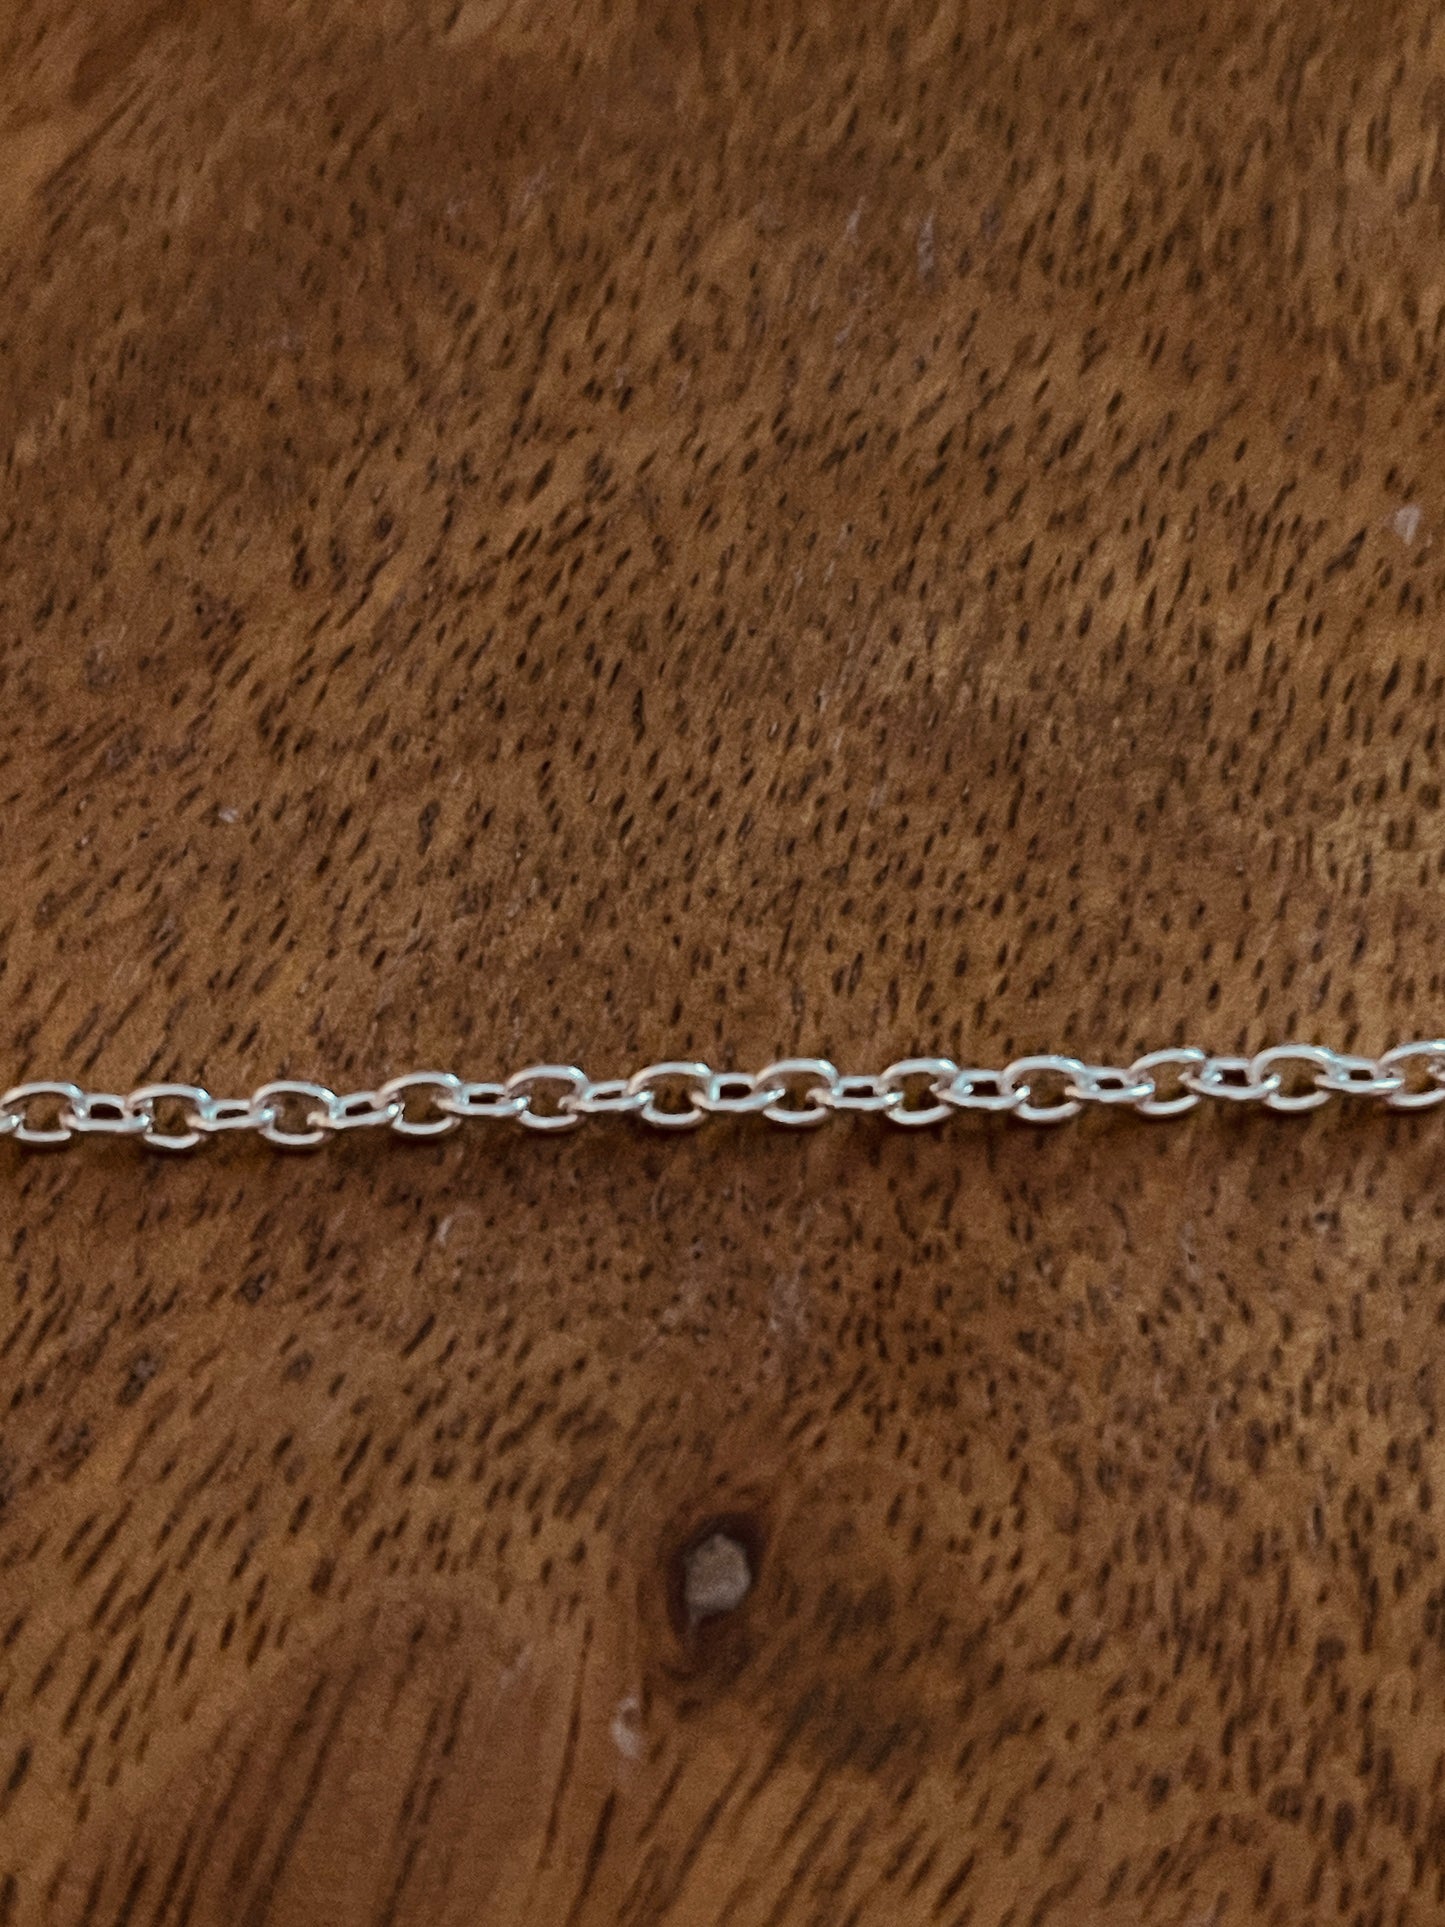 Silver Cable Chain with connector